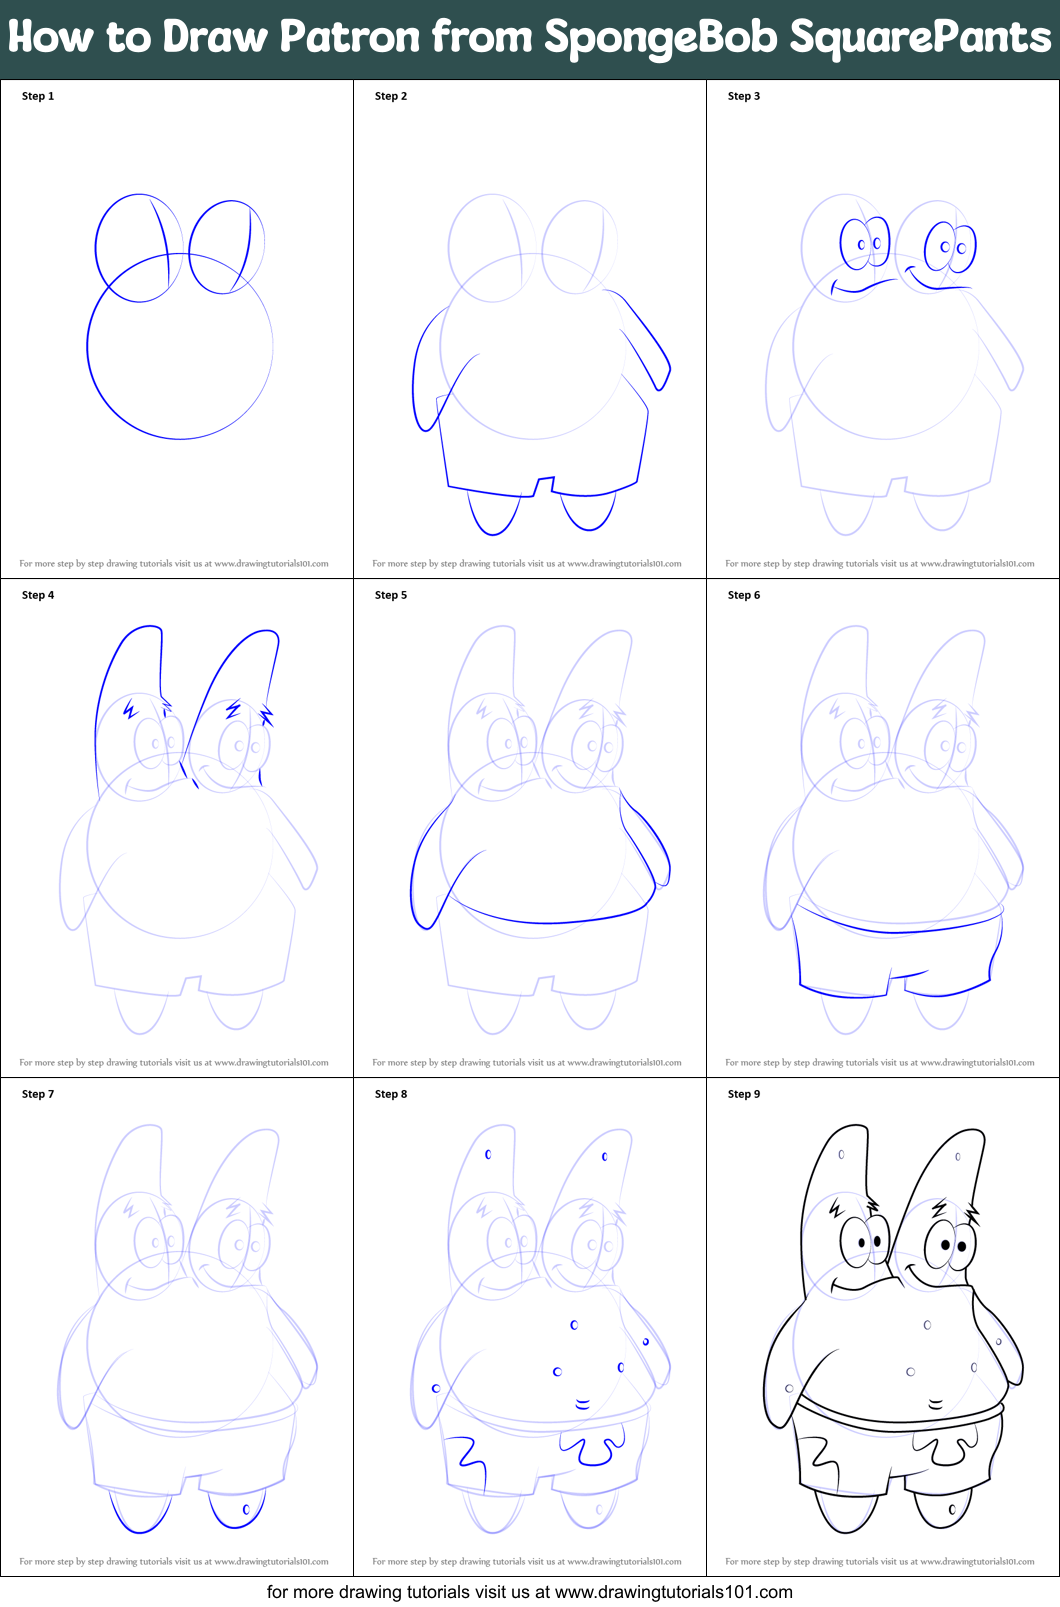 How to Draw Patron from SpongeBob SquarePants printable step by step